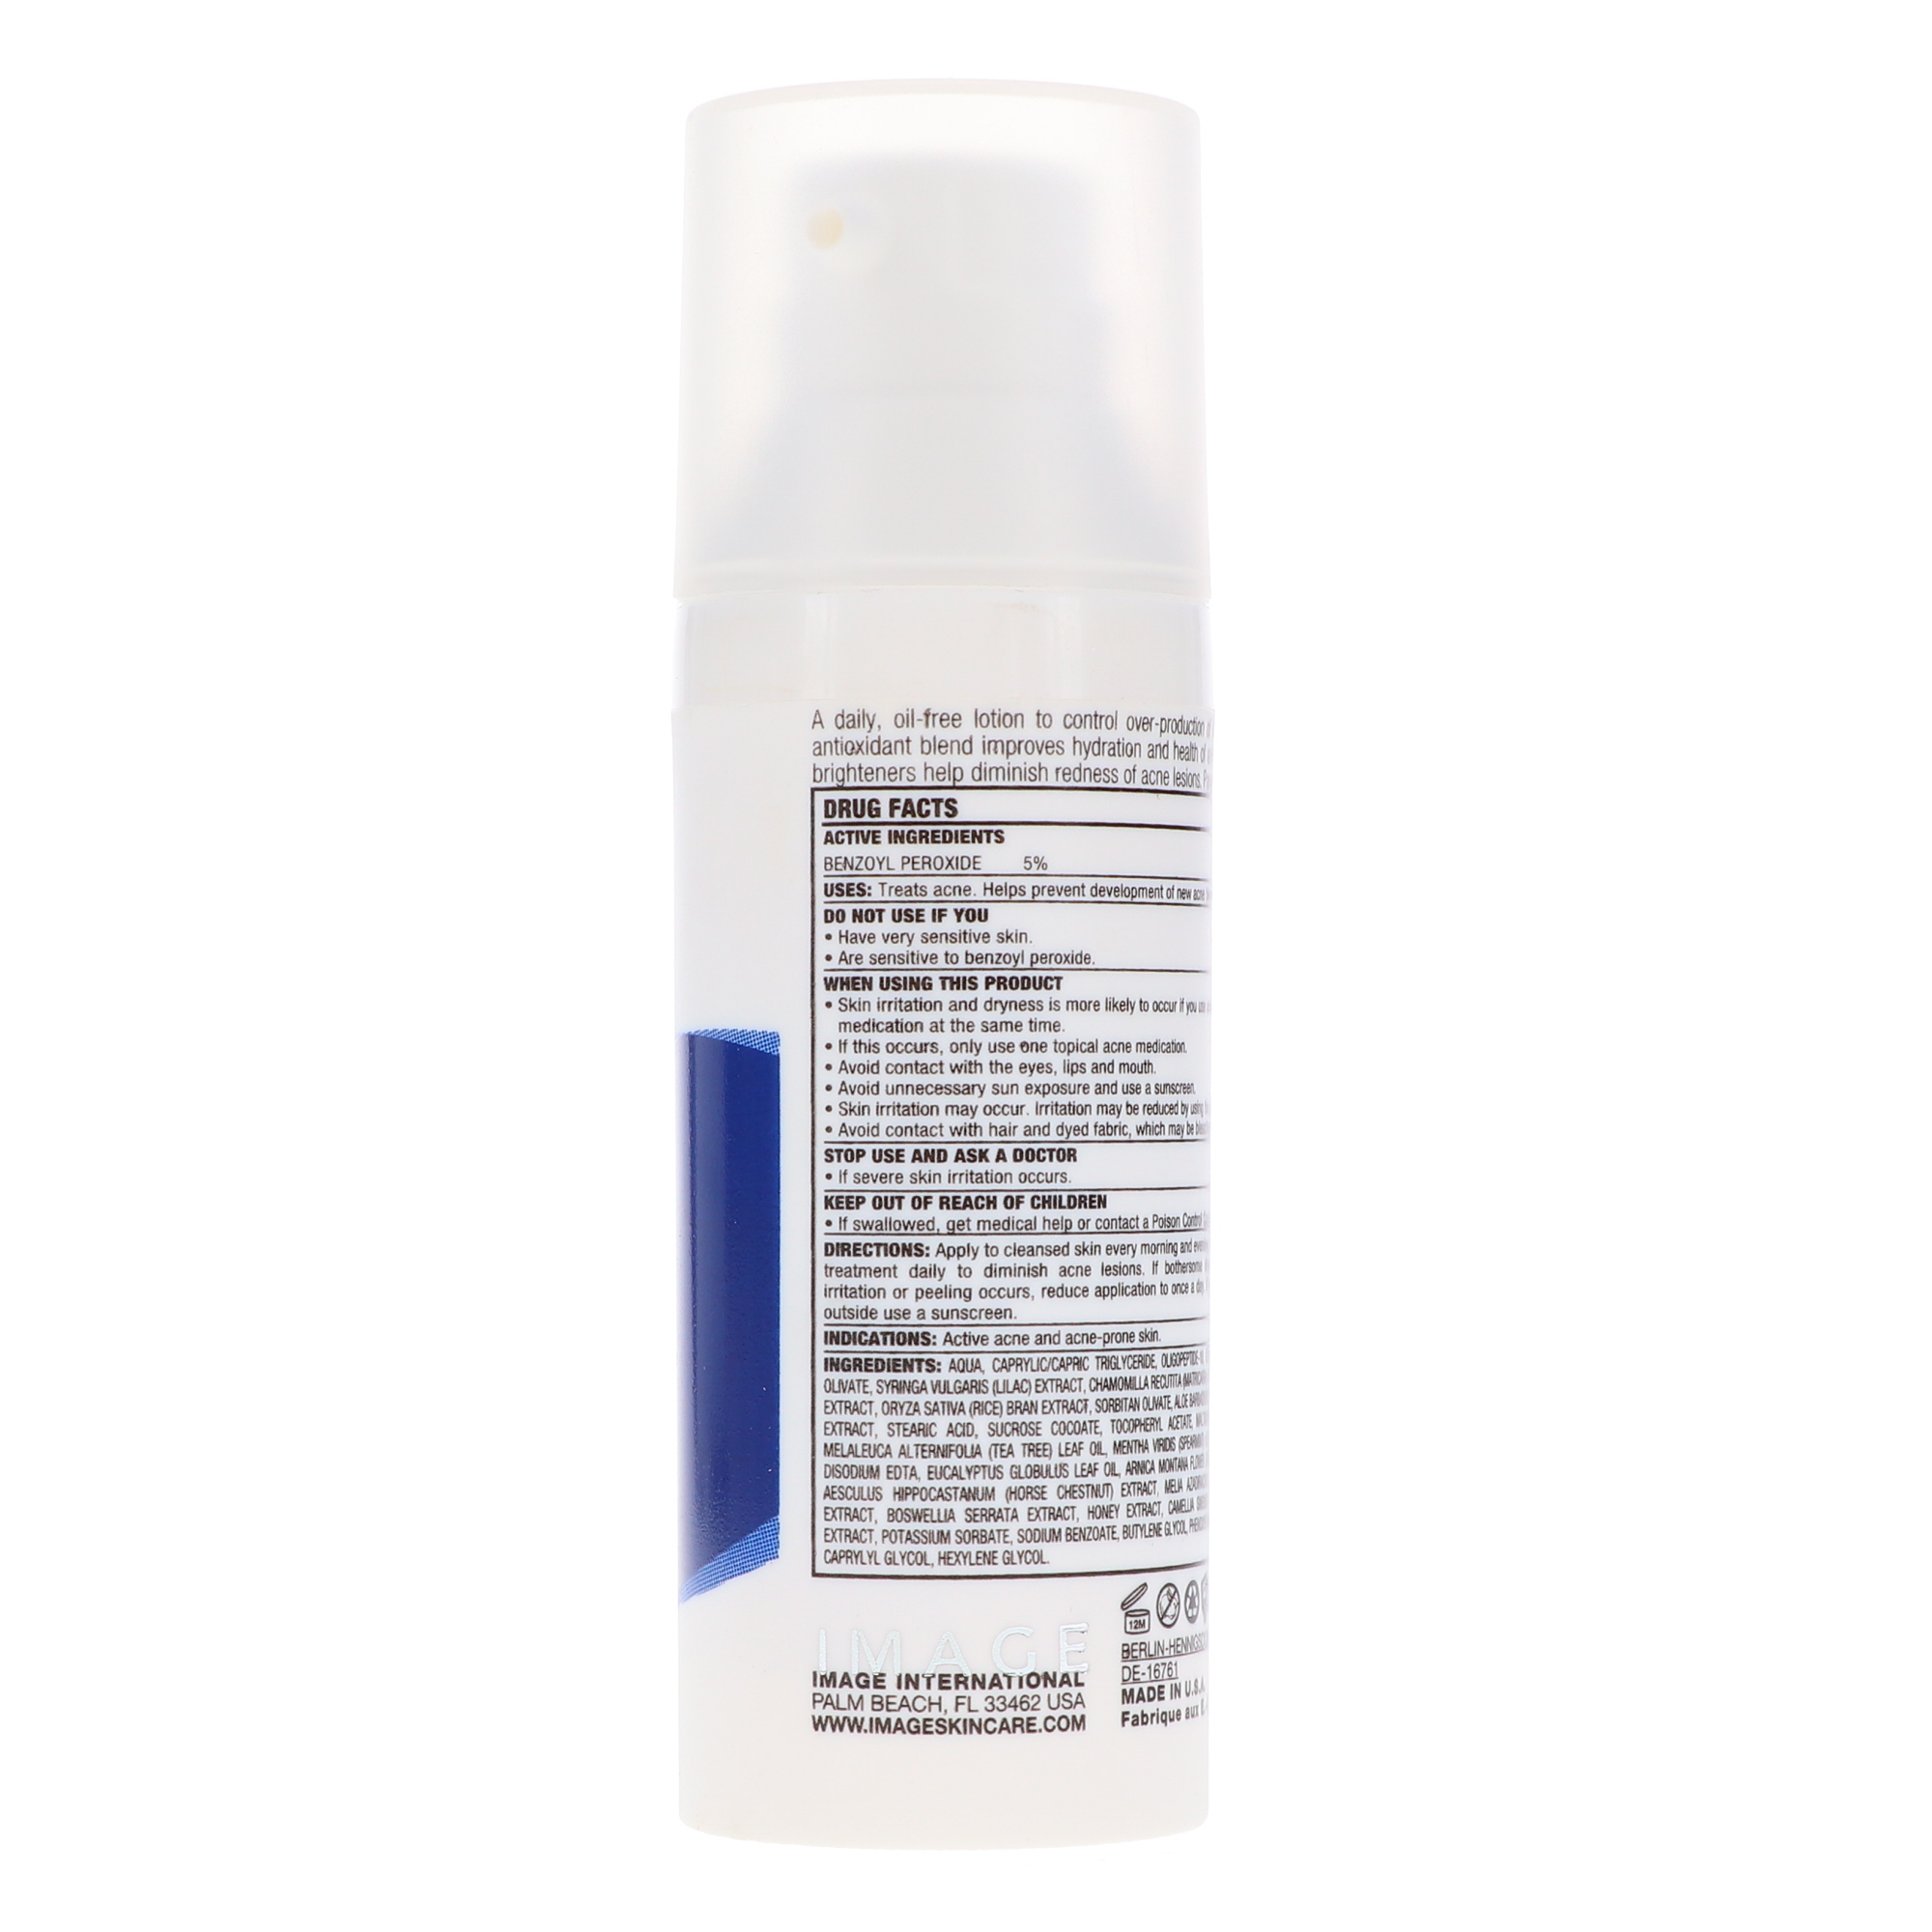 Image Clear Cell Acne Lotion, 1.7 Oz - image 4 of 8